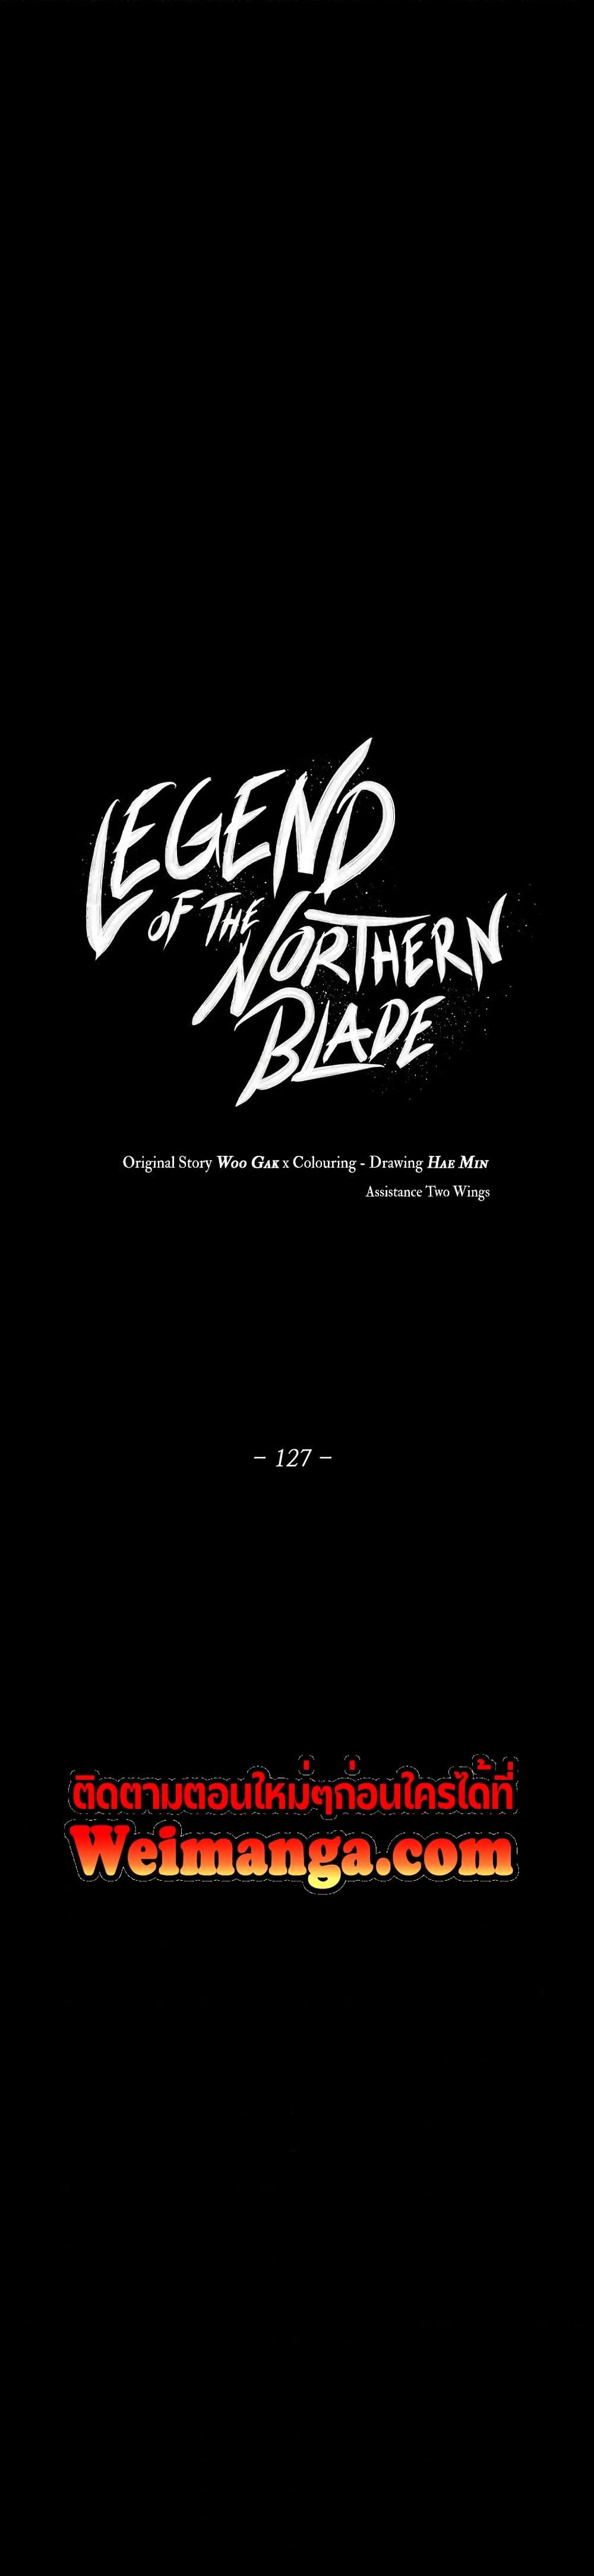 Legend of the Northern Blade 127-127